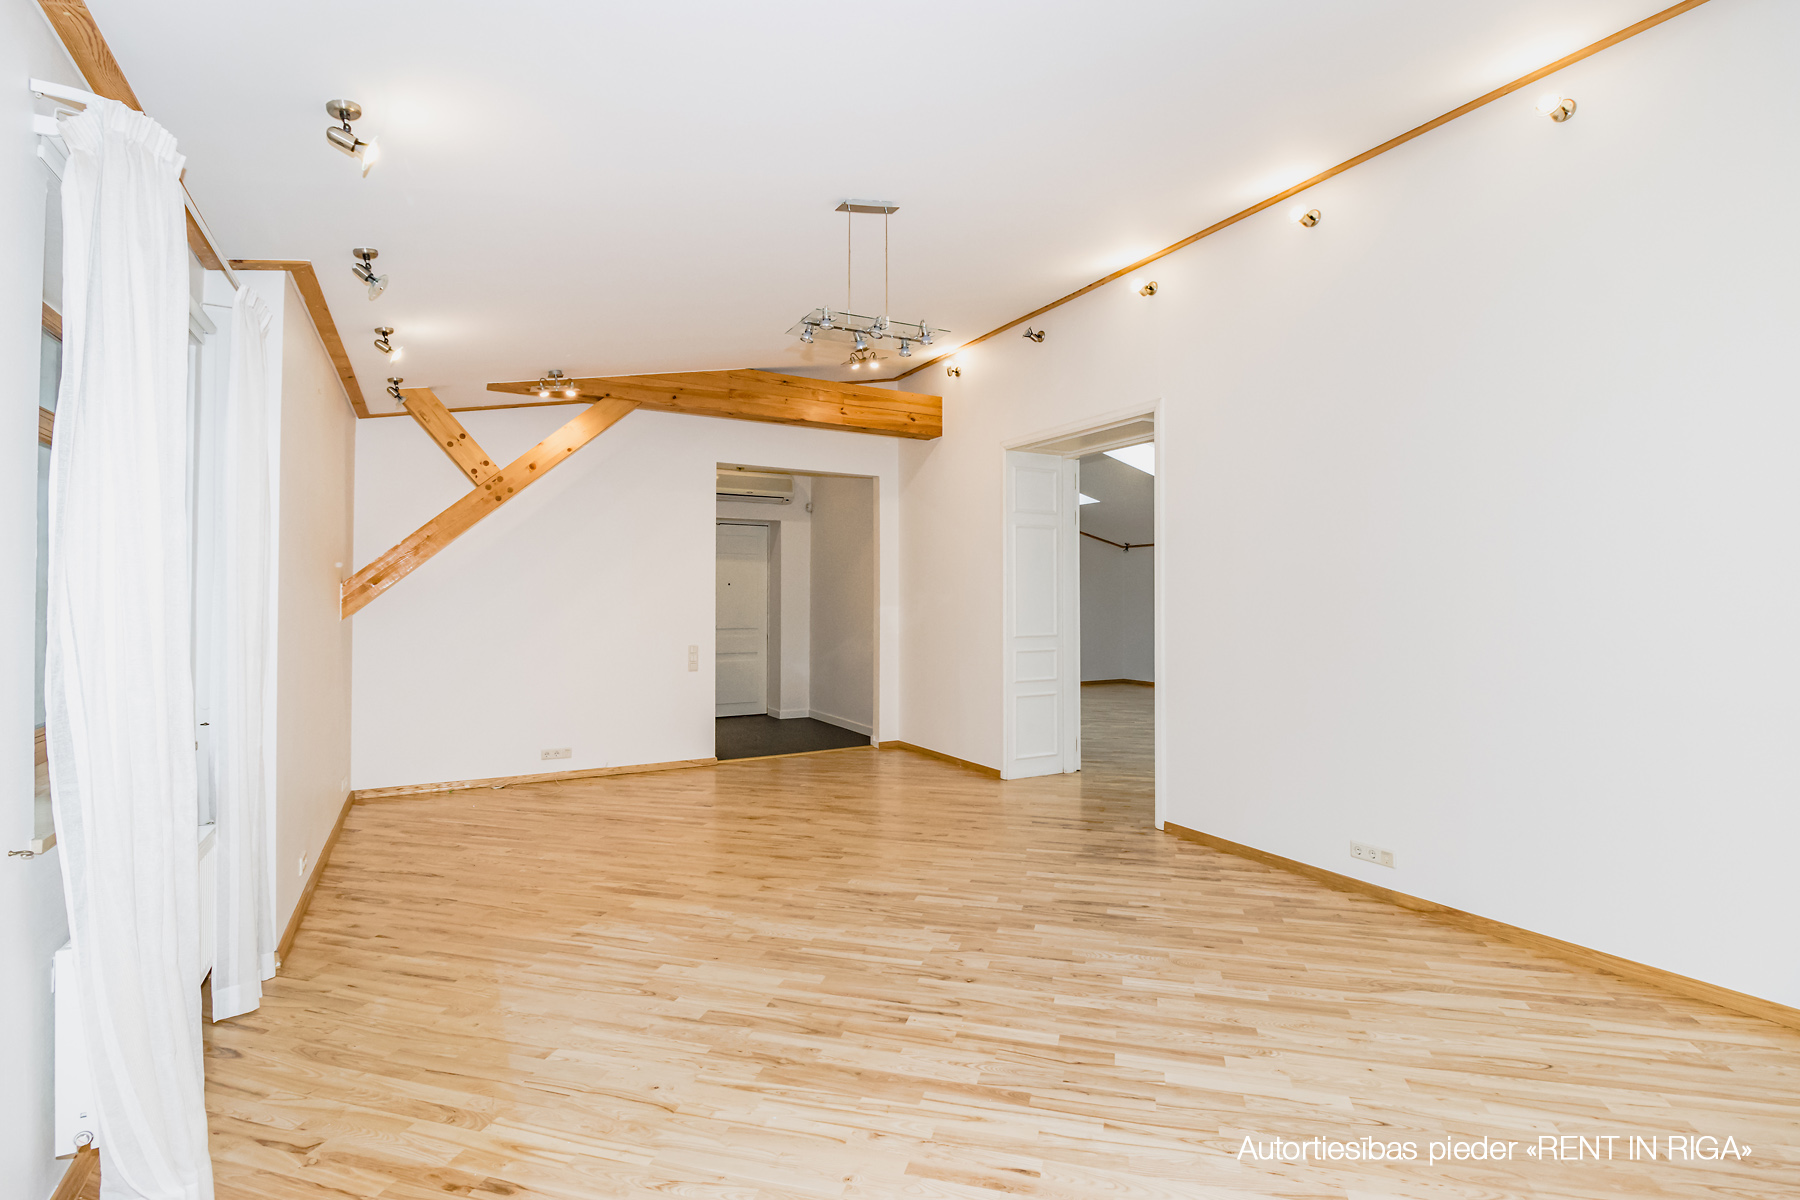 Apartment for rent, Jēkaba street 20/22 - Image 1